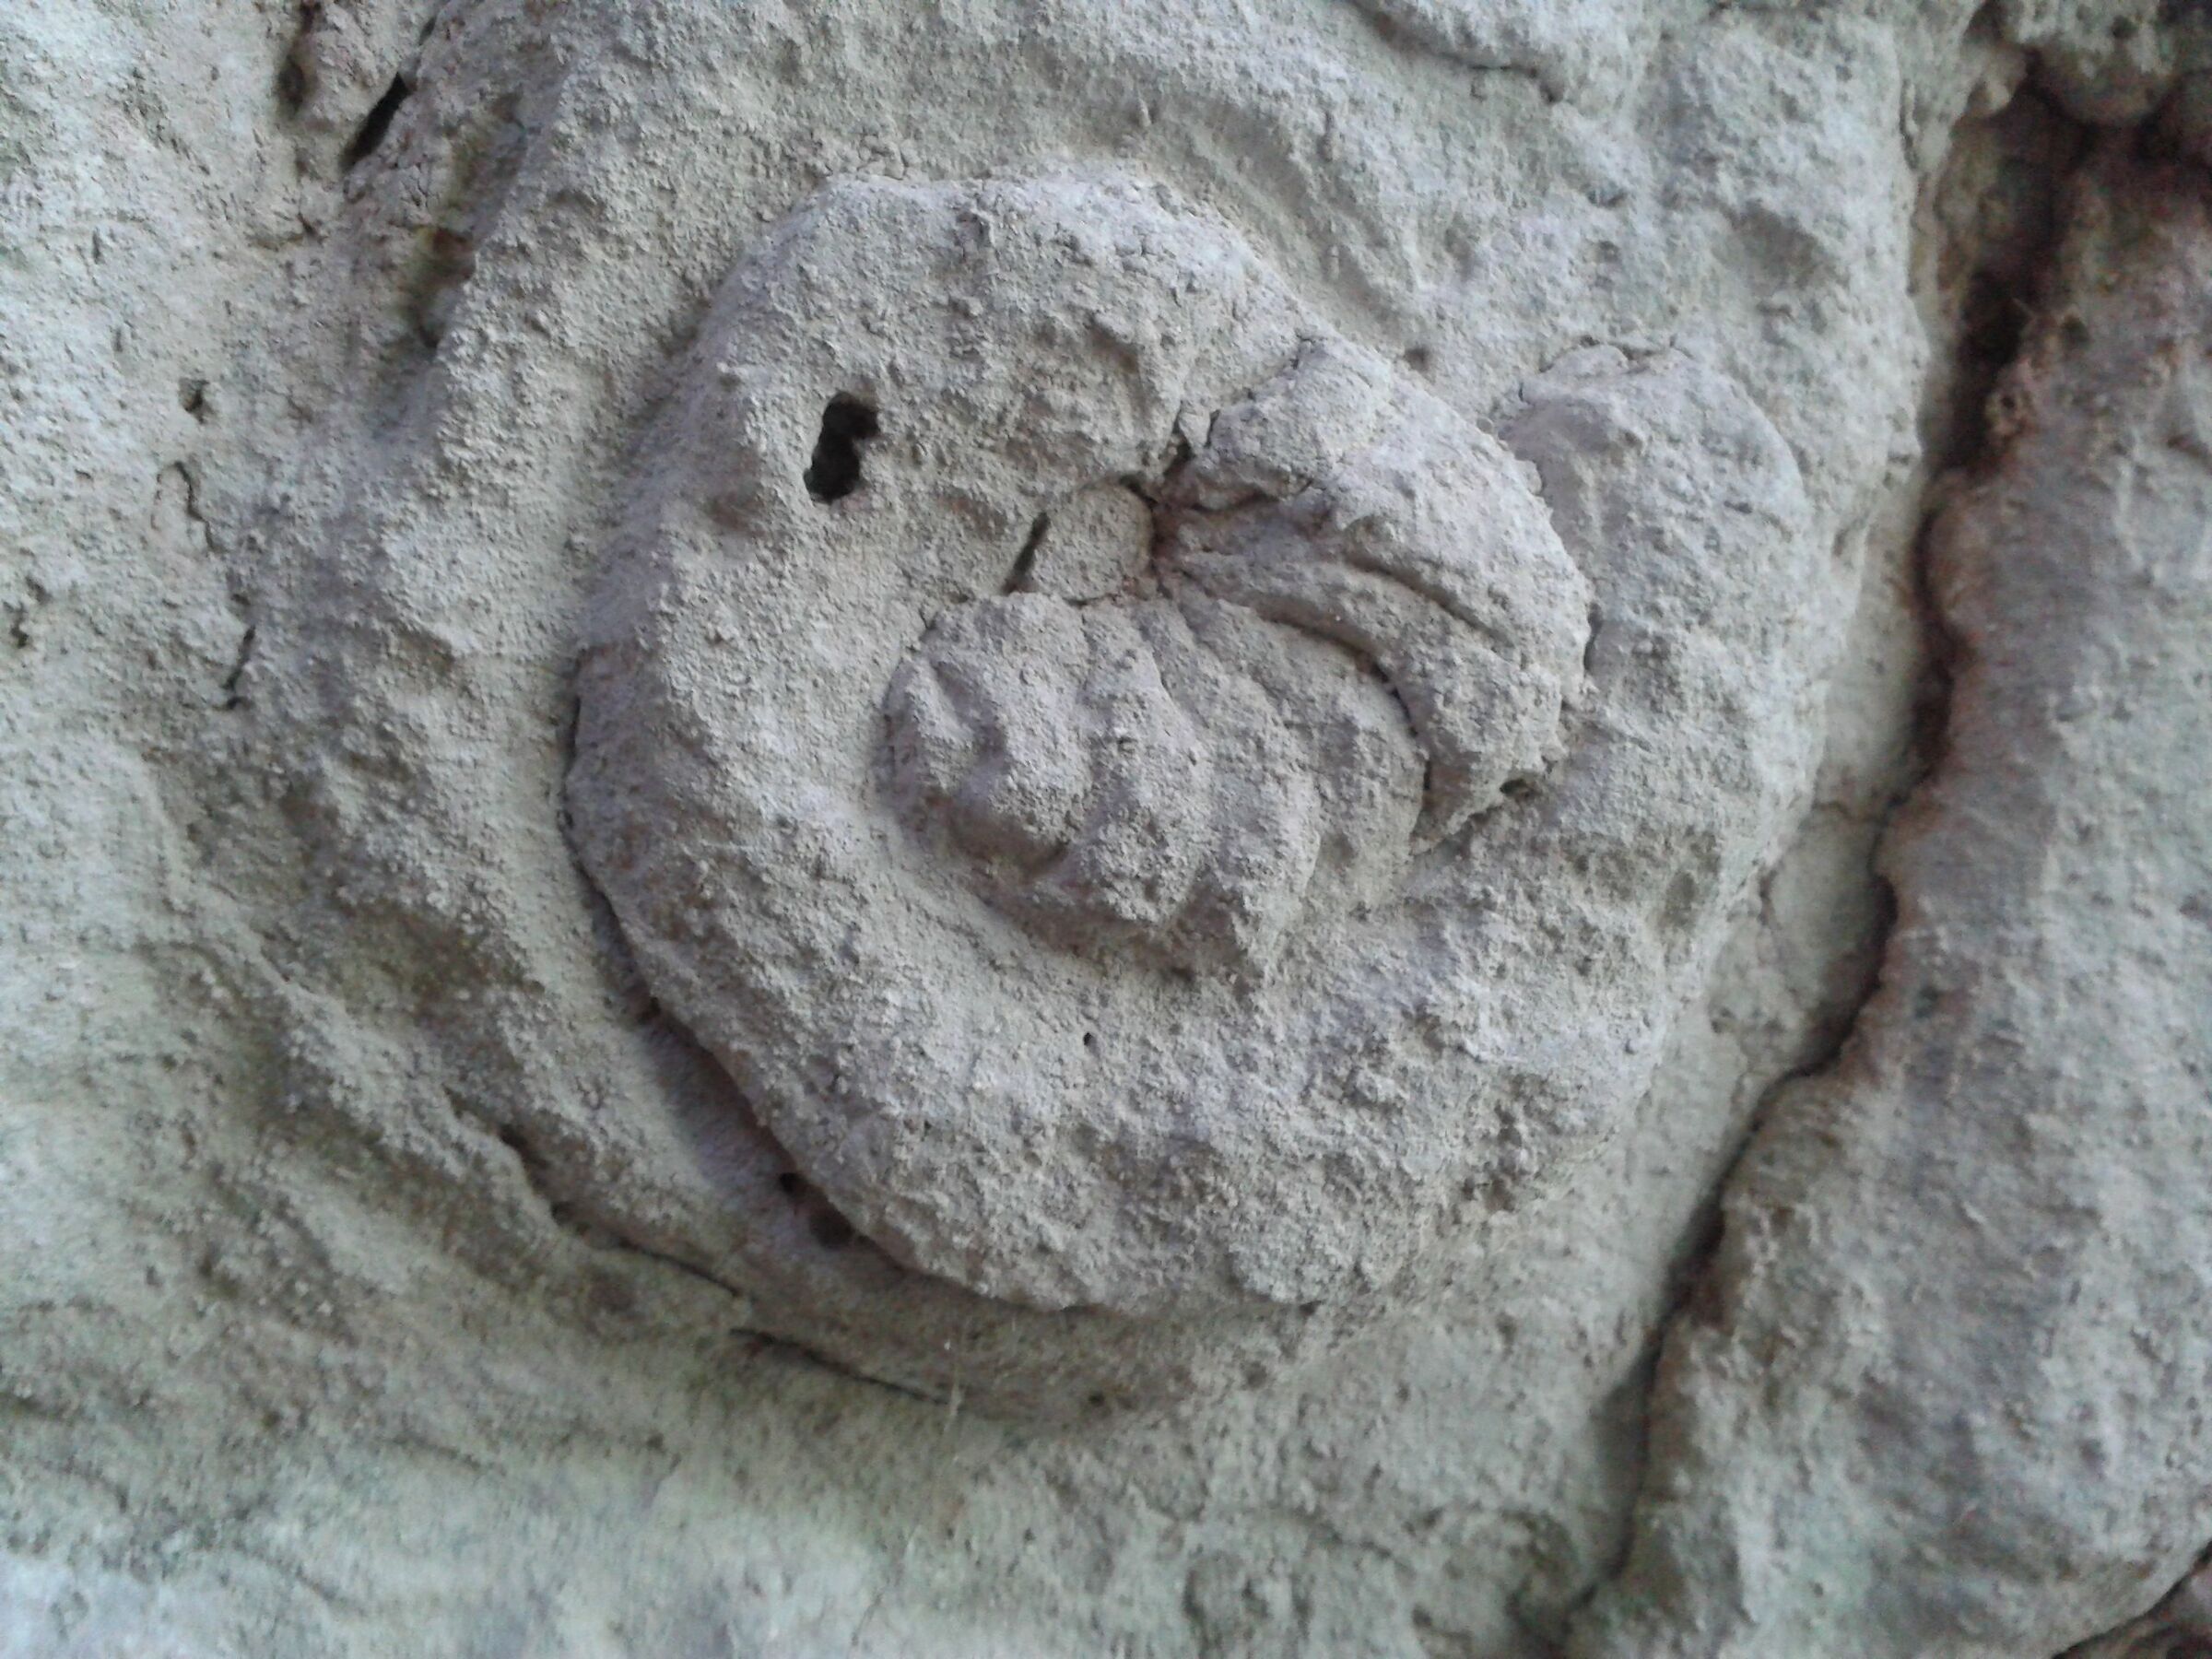 Fossil in the woods, Comano Terme...